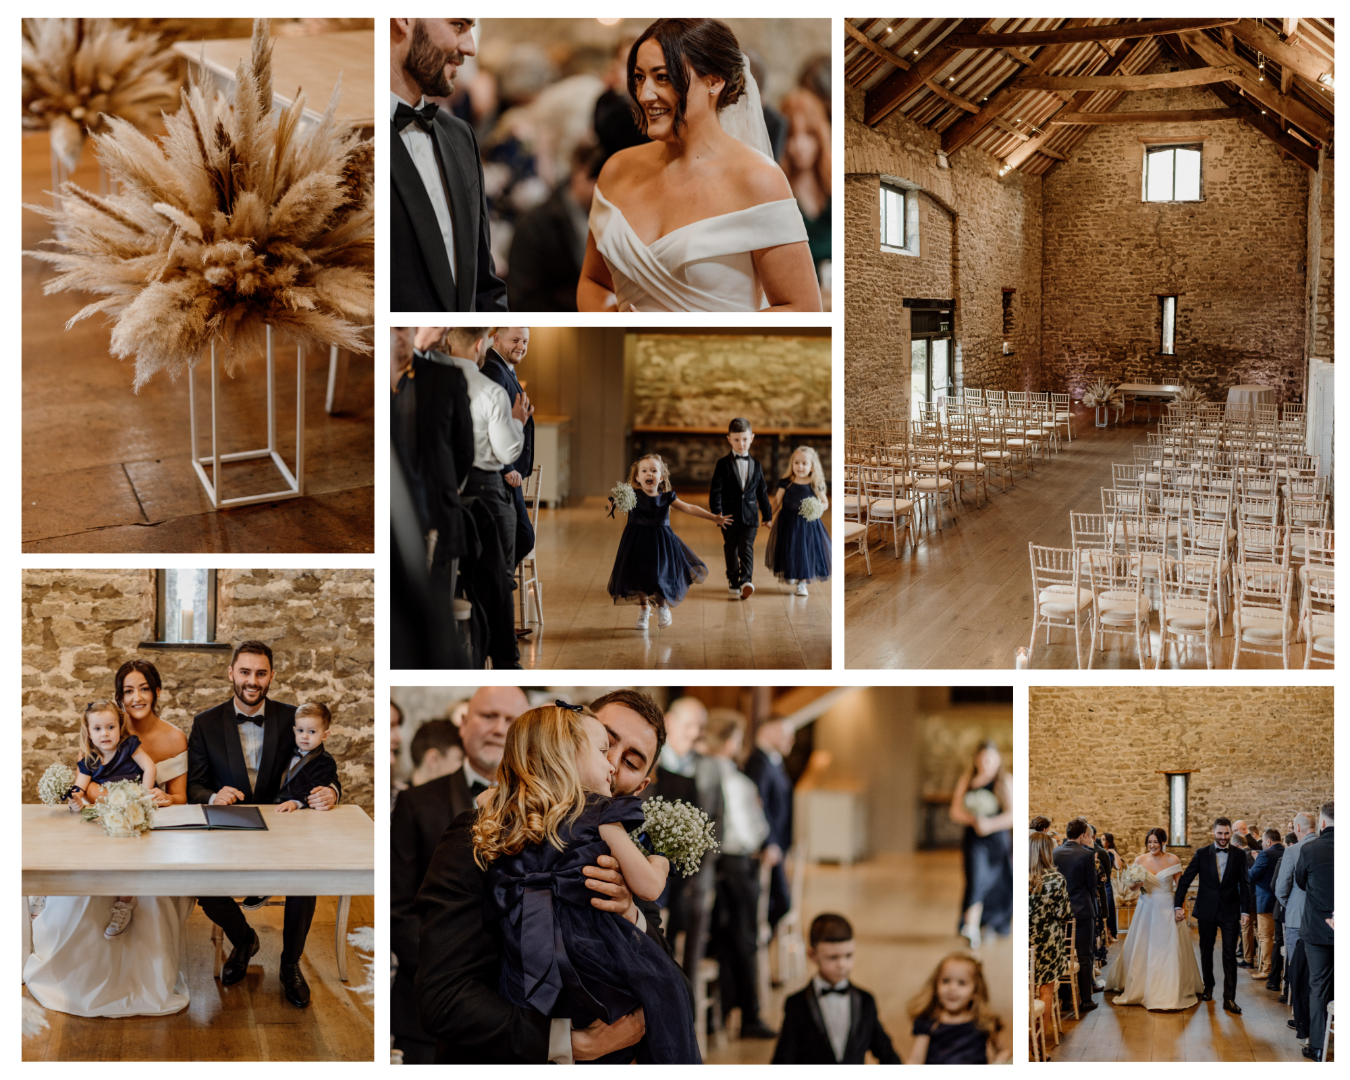 A collage of photos of a wedding ceremony in a barn.